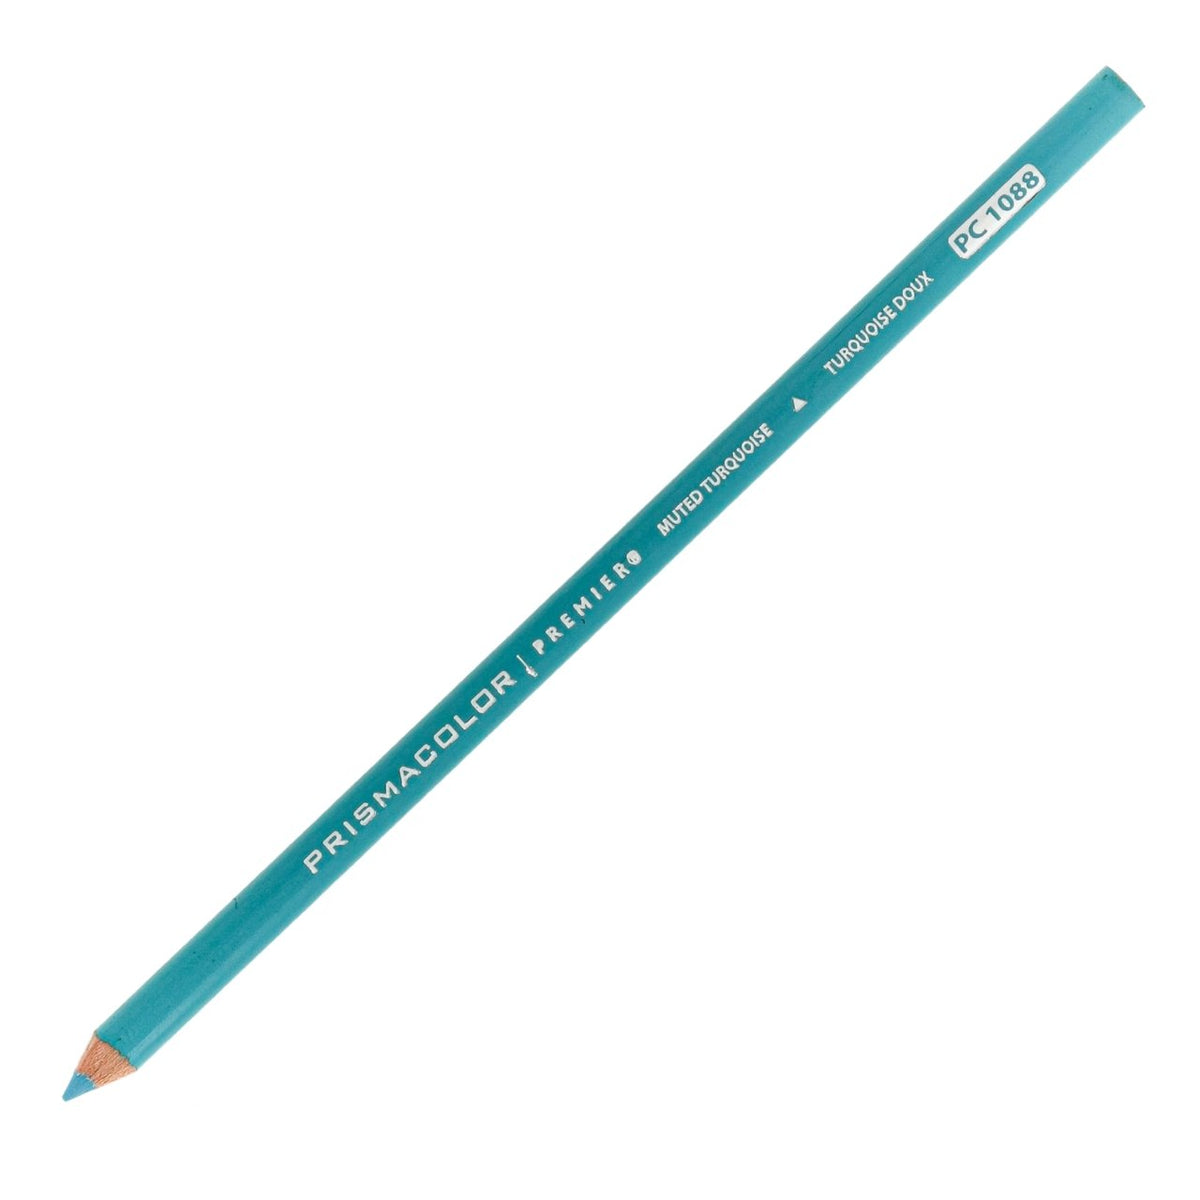 Prismacolor Premier Colored Pencil - Muted Turquoise 1088 - merriartist.com